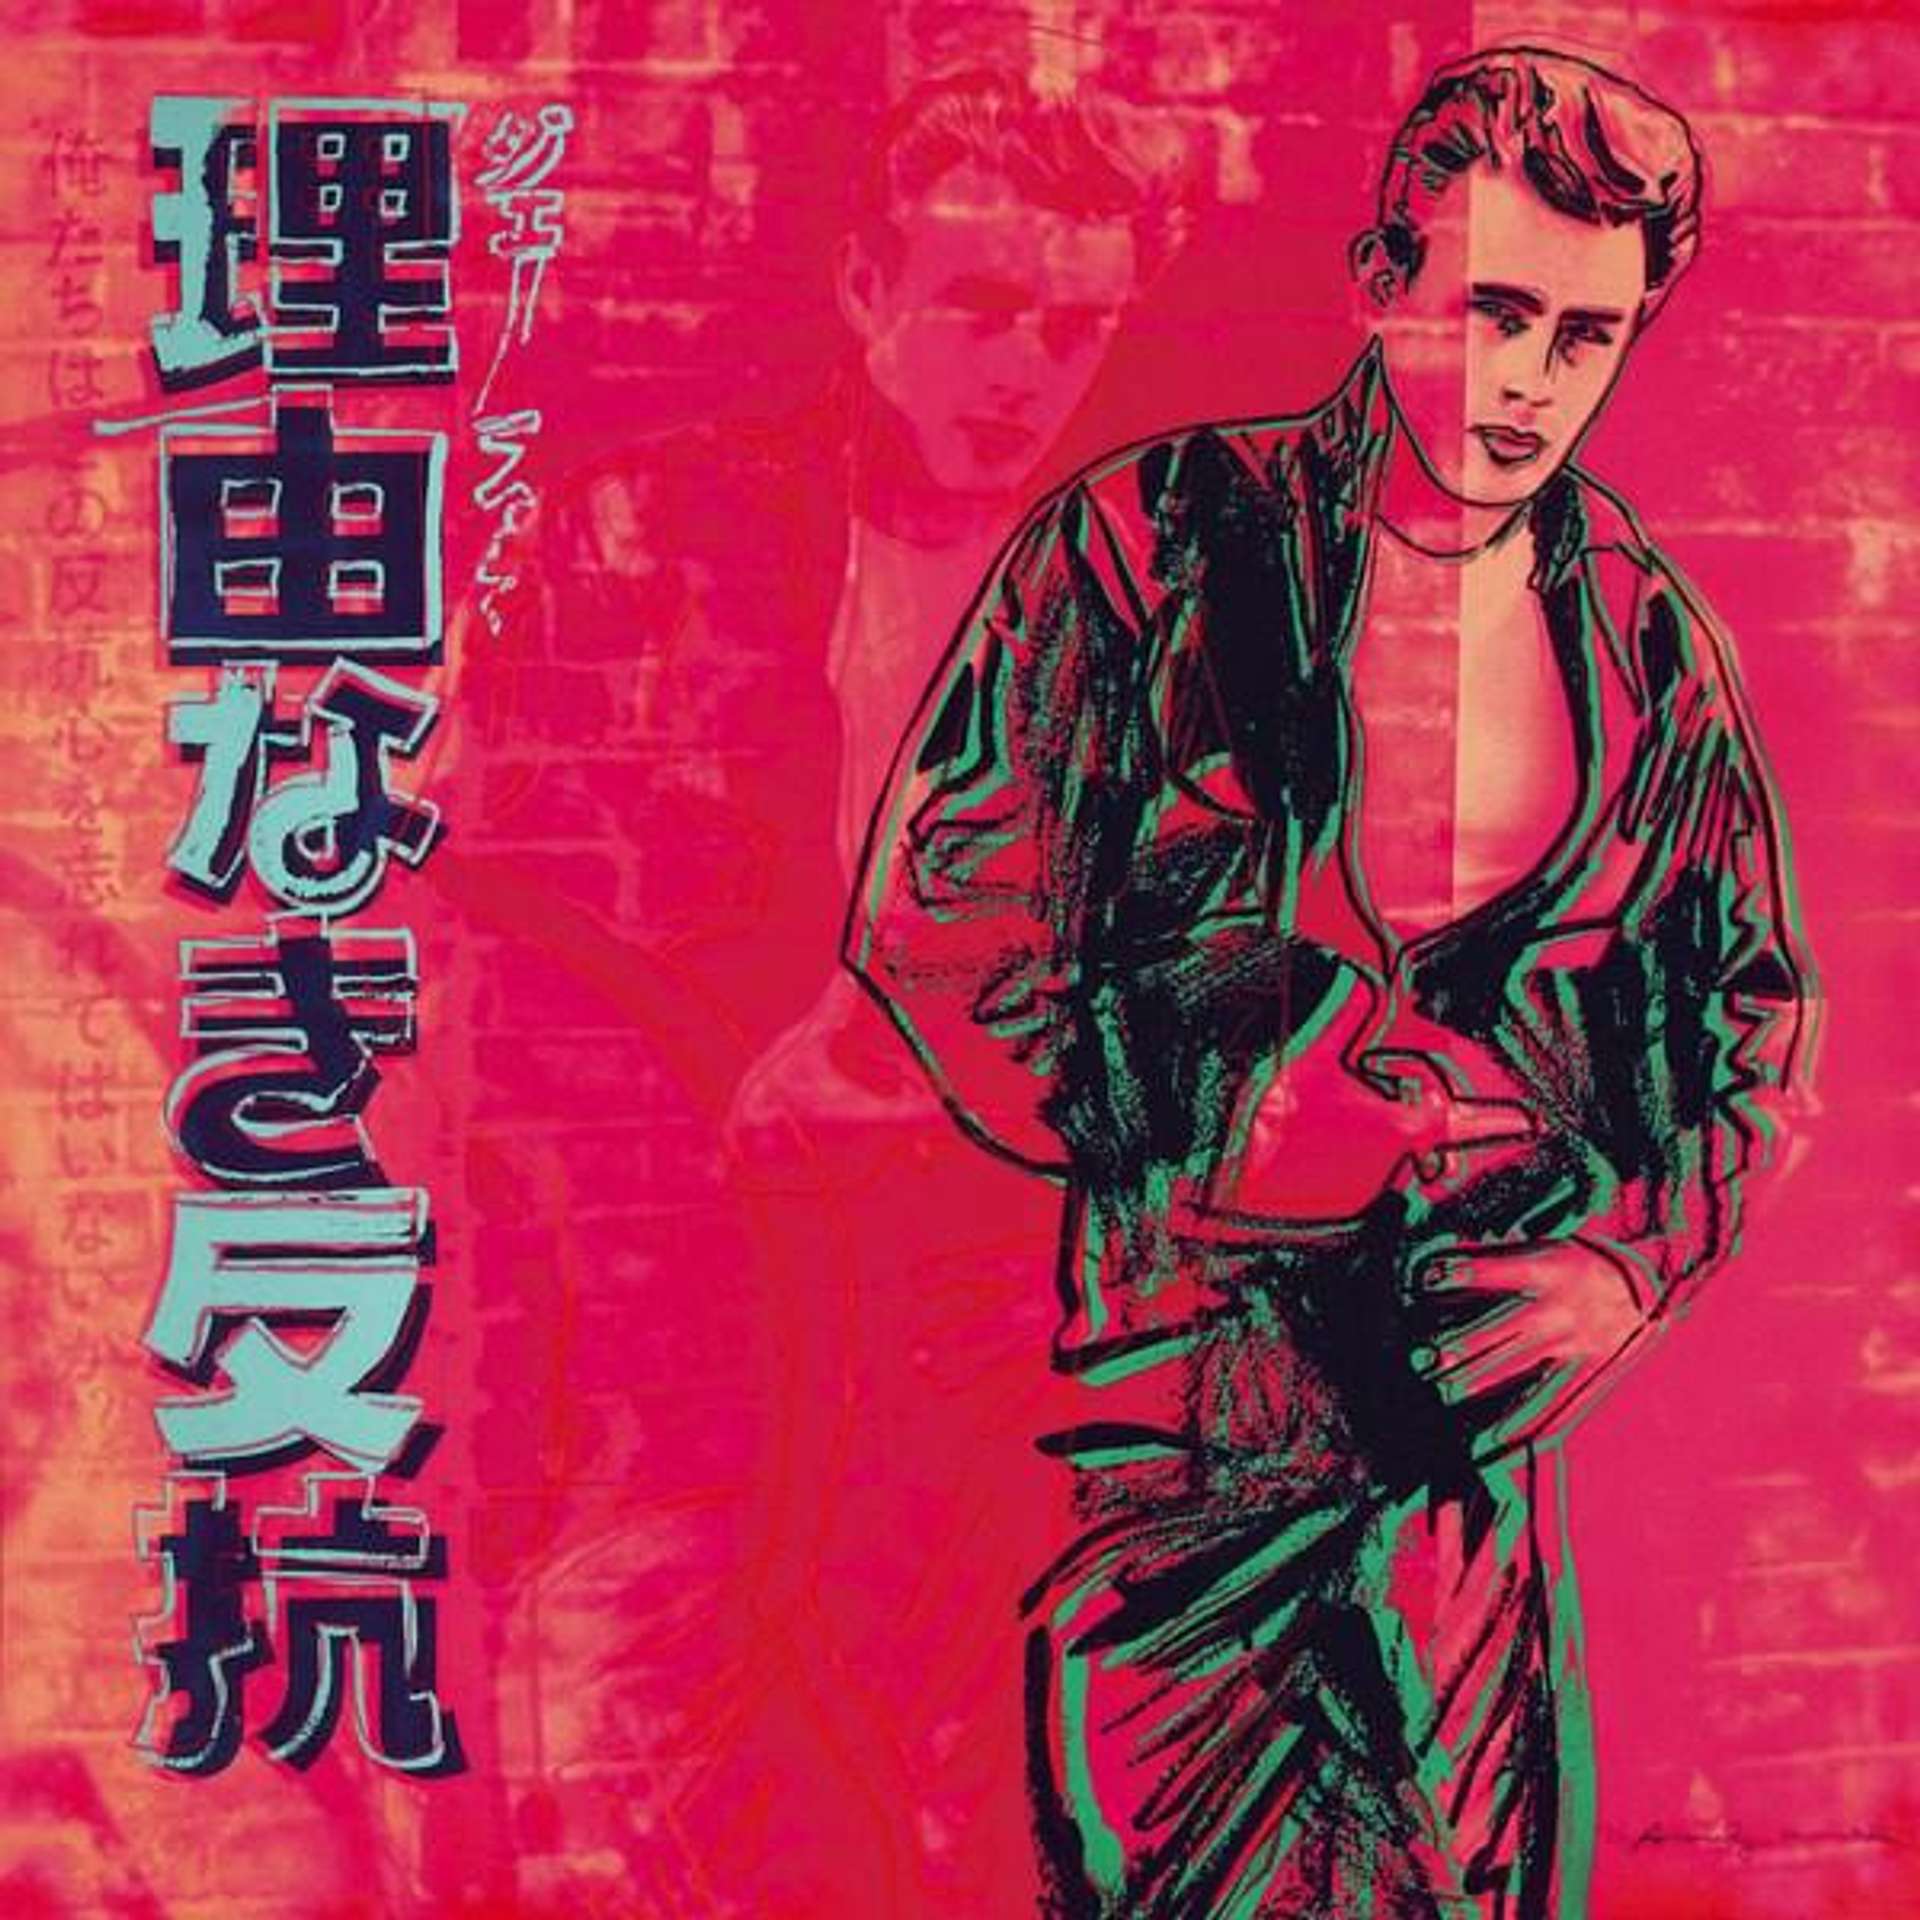 Rebel Without A Cause (James Dean) (F. & S. II.335) by Andy Warhol  - MyArtBroker 